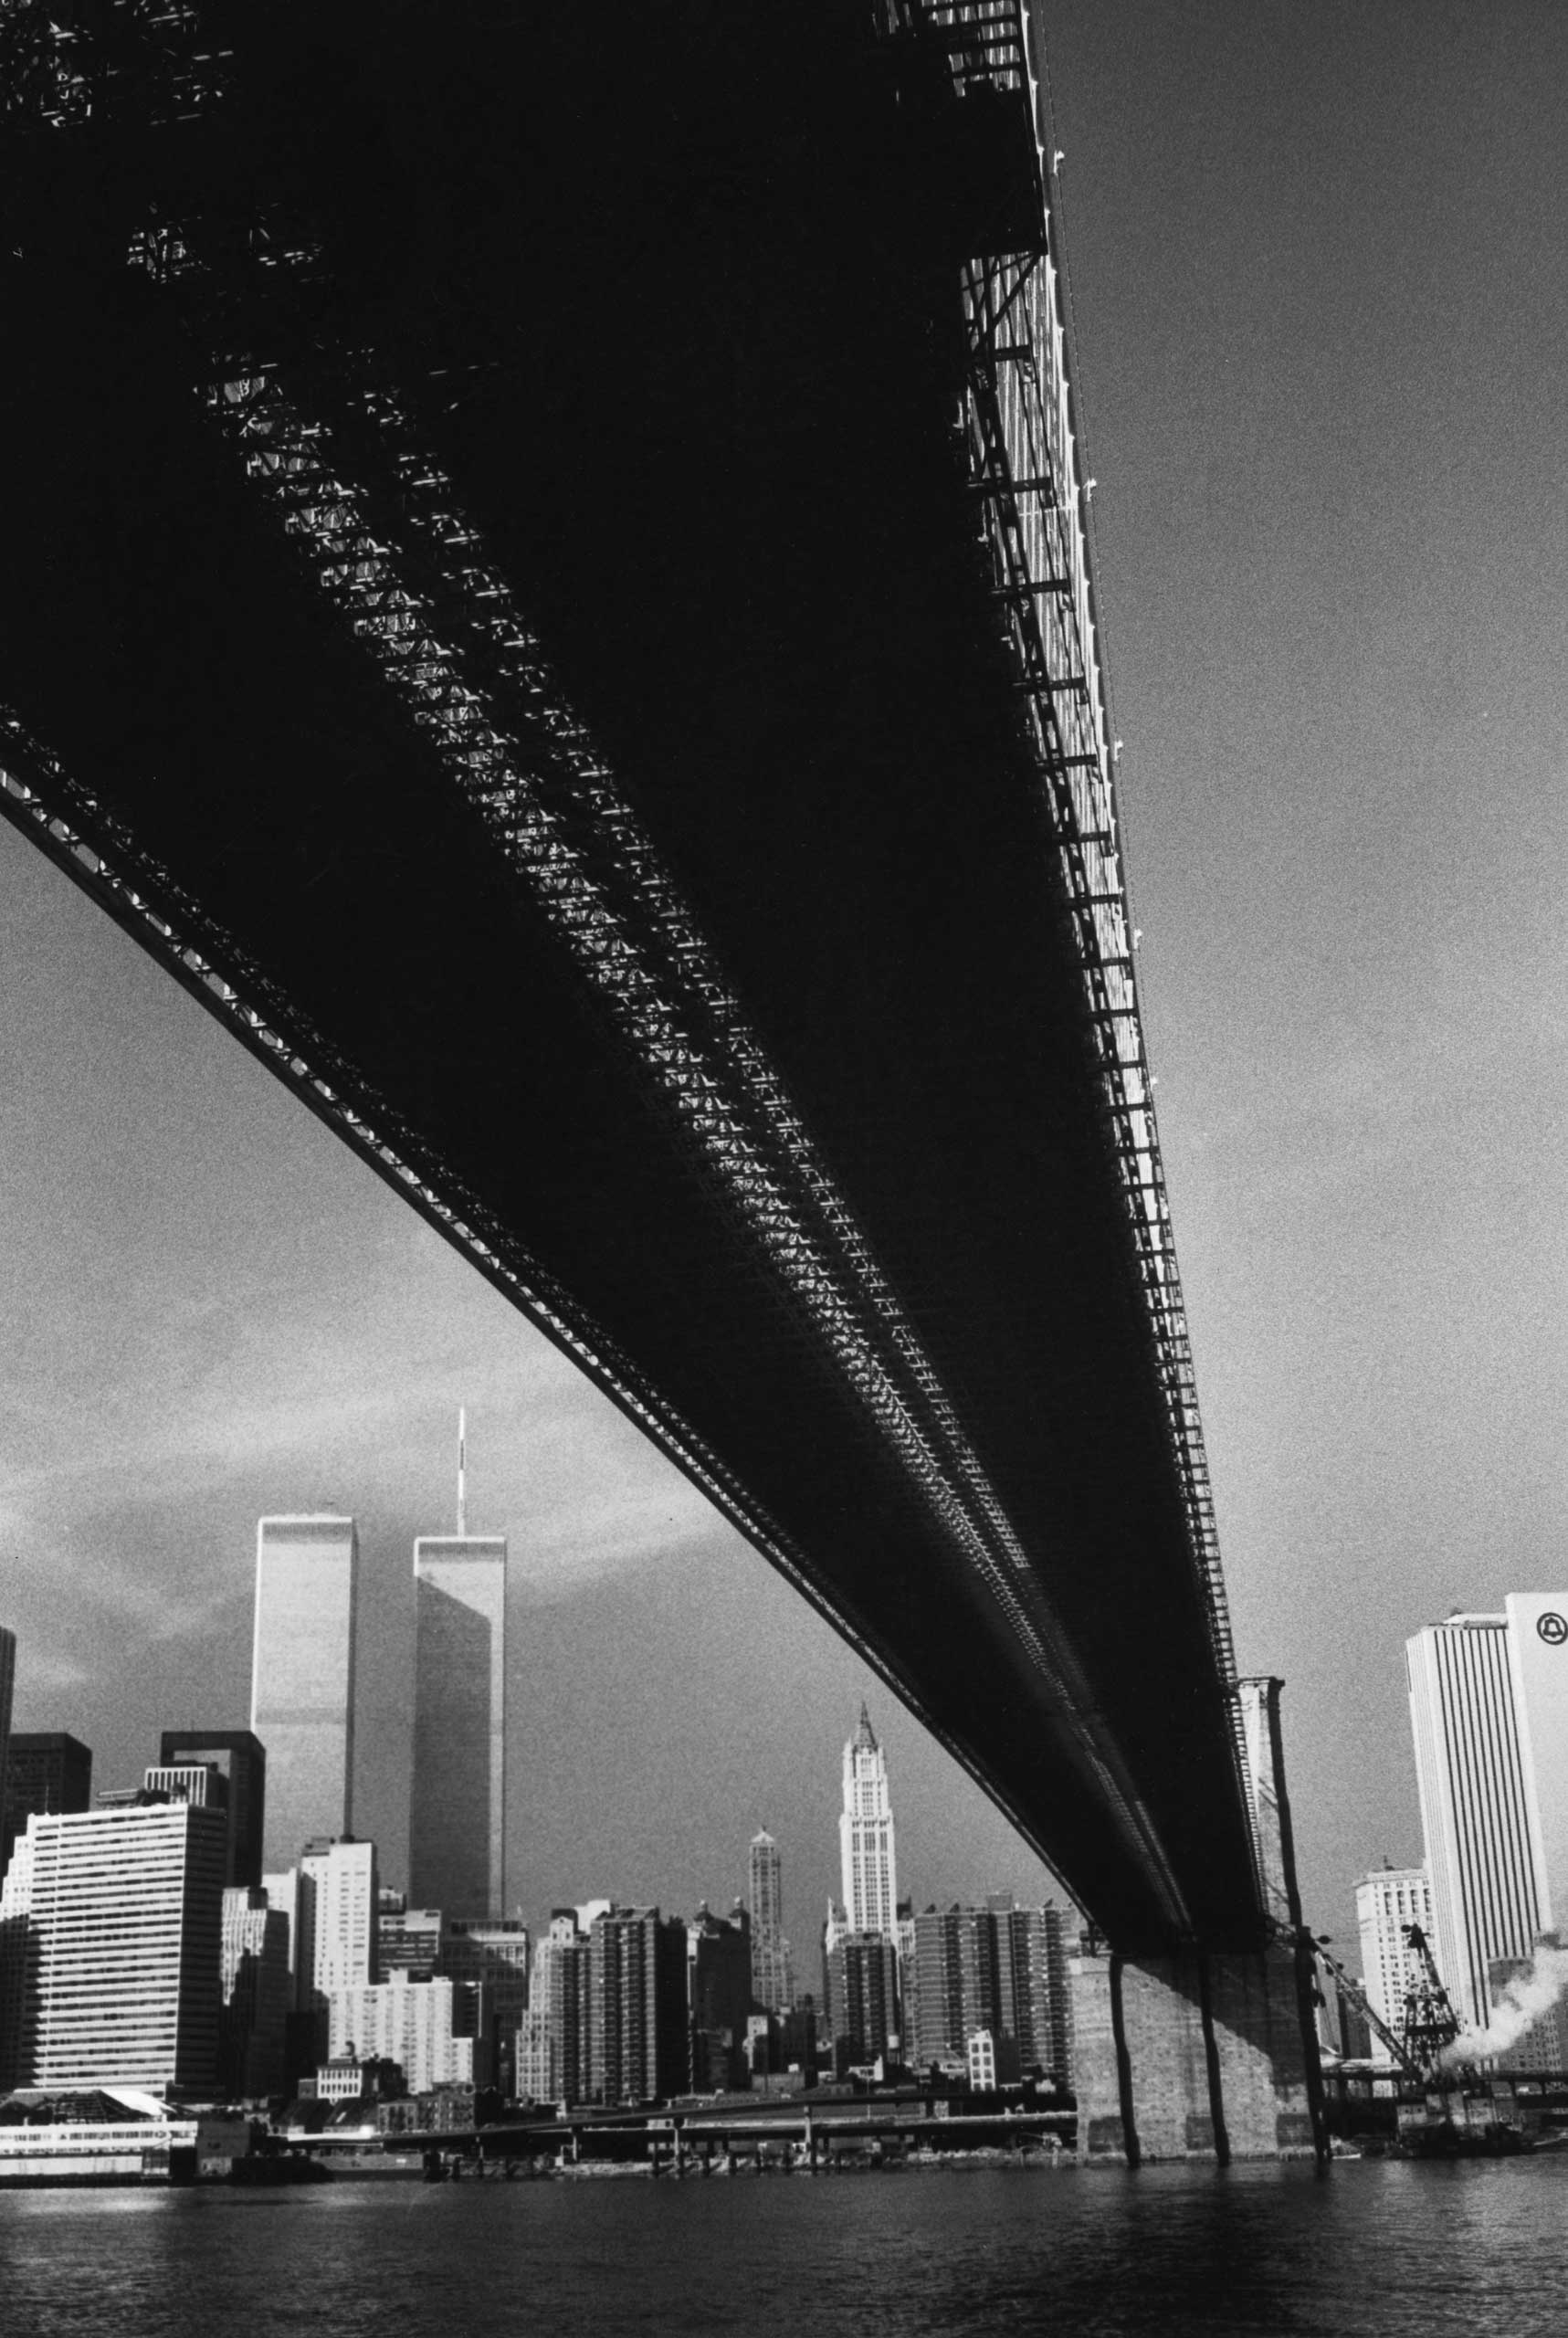 Alfred Eisenstaedt's 1983 portrait of the Twin Towers, taken from across the East River and beneath the Brooklyn Bridge.